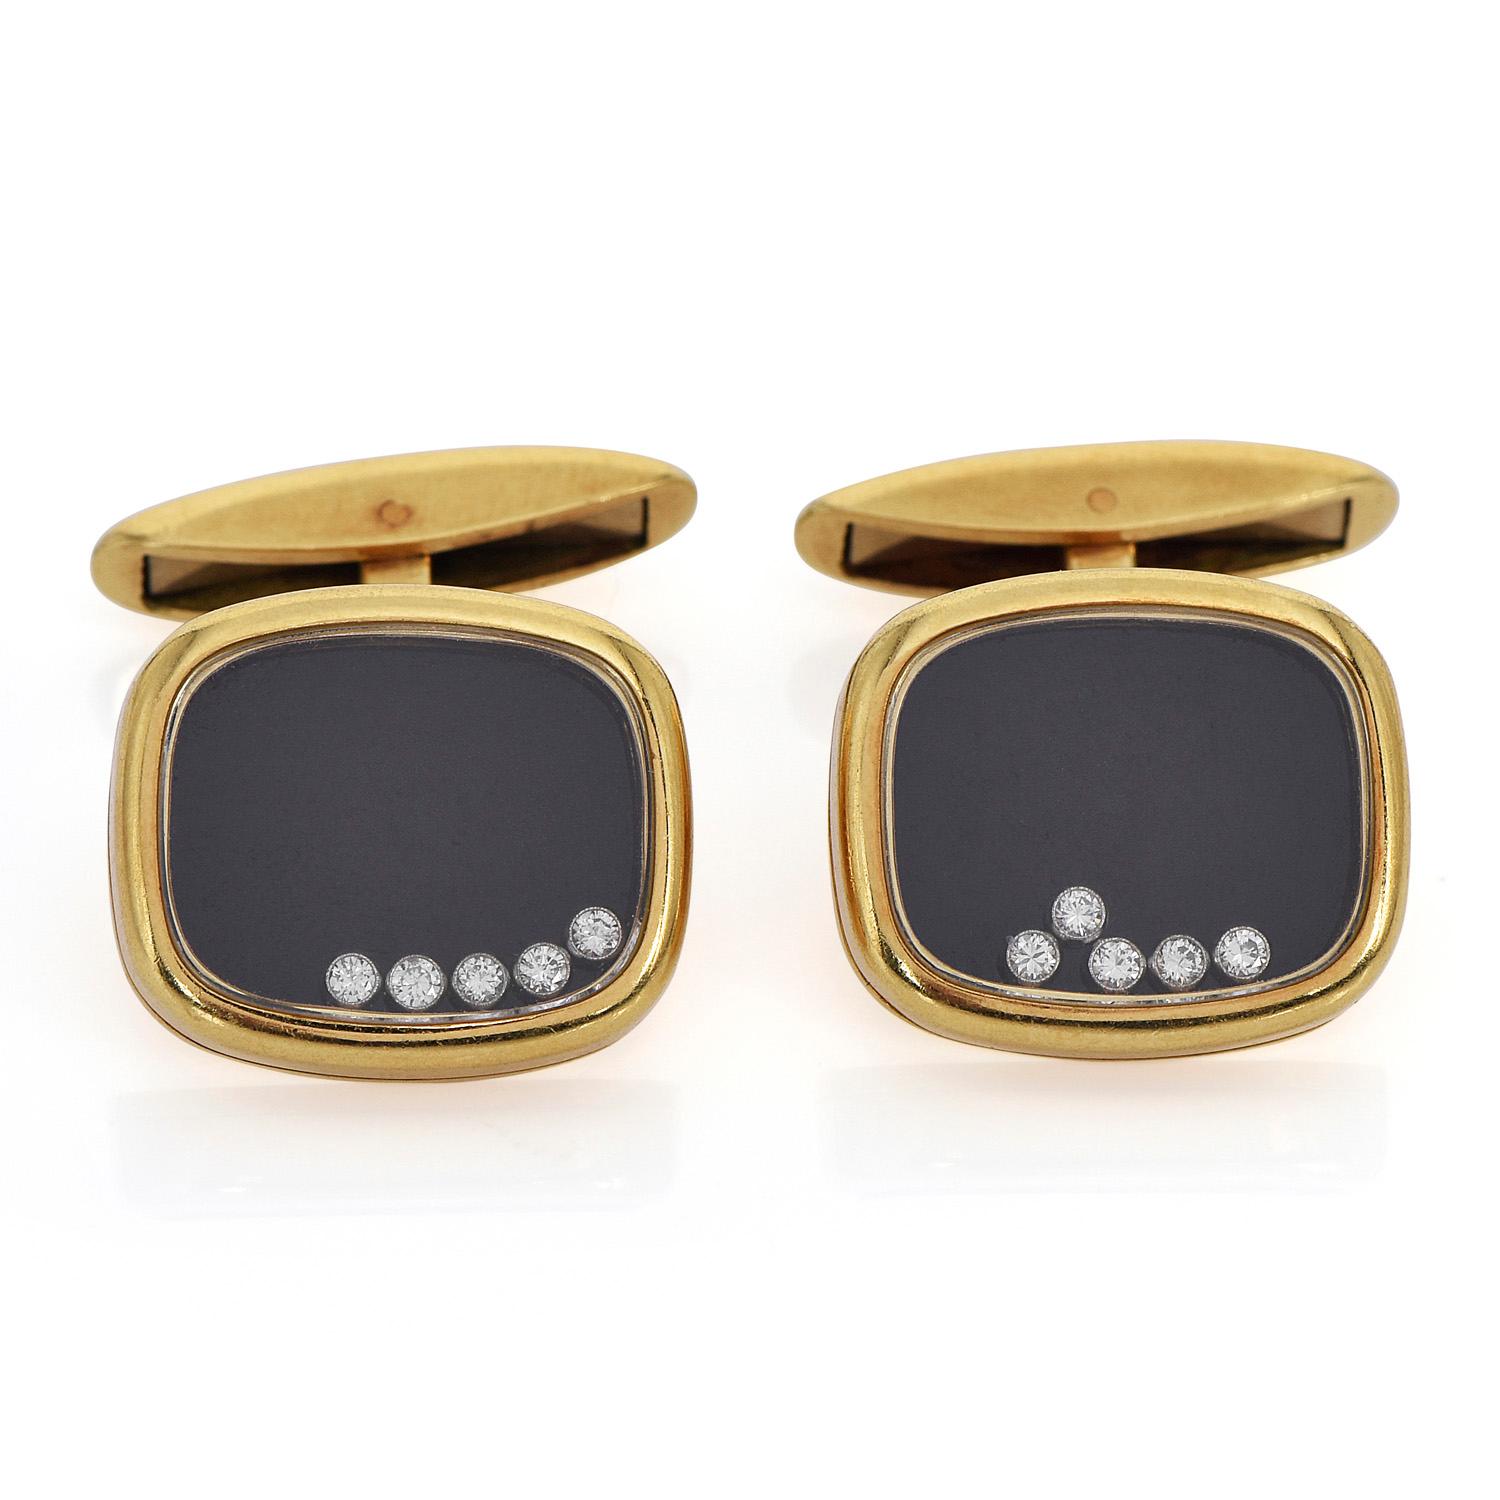 This classic vintage Chopard from happy diamond collection tuxedo Cushion Shaped Cufflinks is crafted in Solid 18K Yellow Gold. 

With a Black Onyx Dial, 10 Round Cut, Bezel set, 

Floating Diamonds, 

with a total carat weight of 0.25 carats,